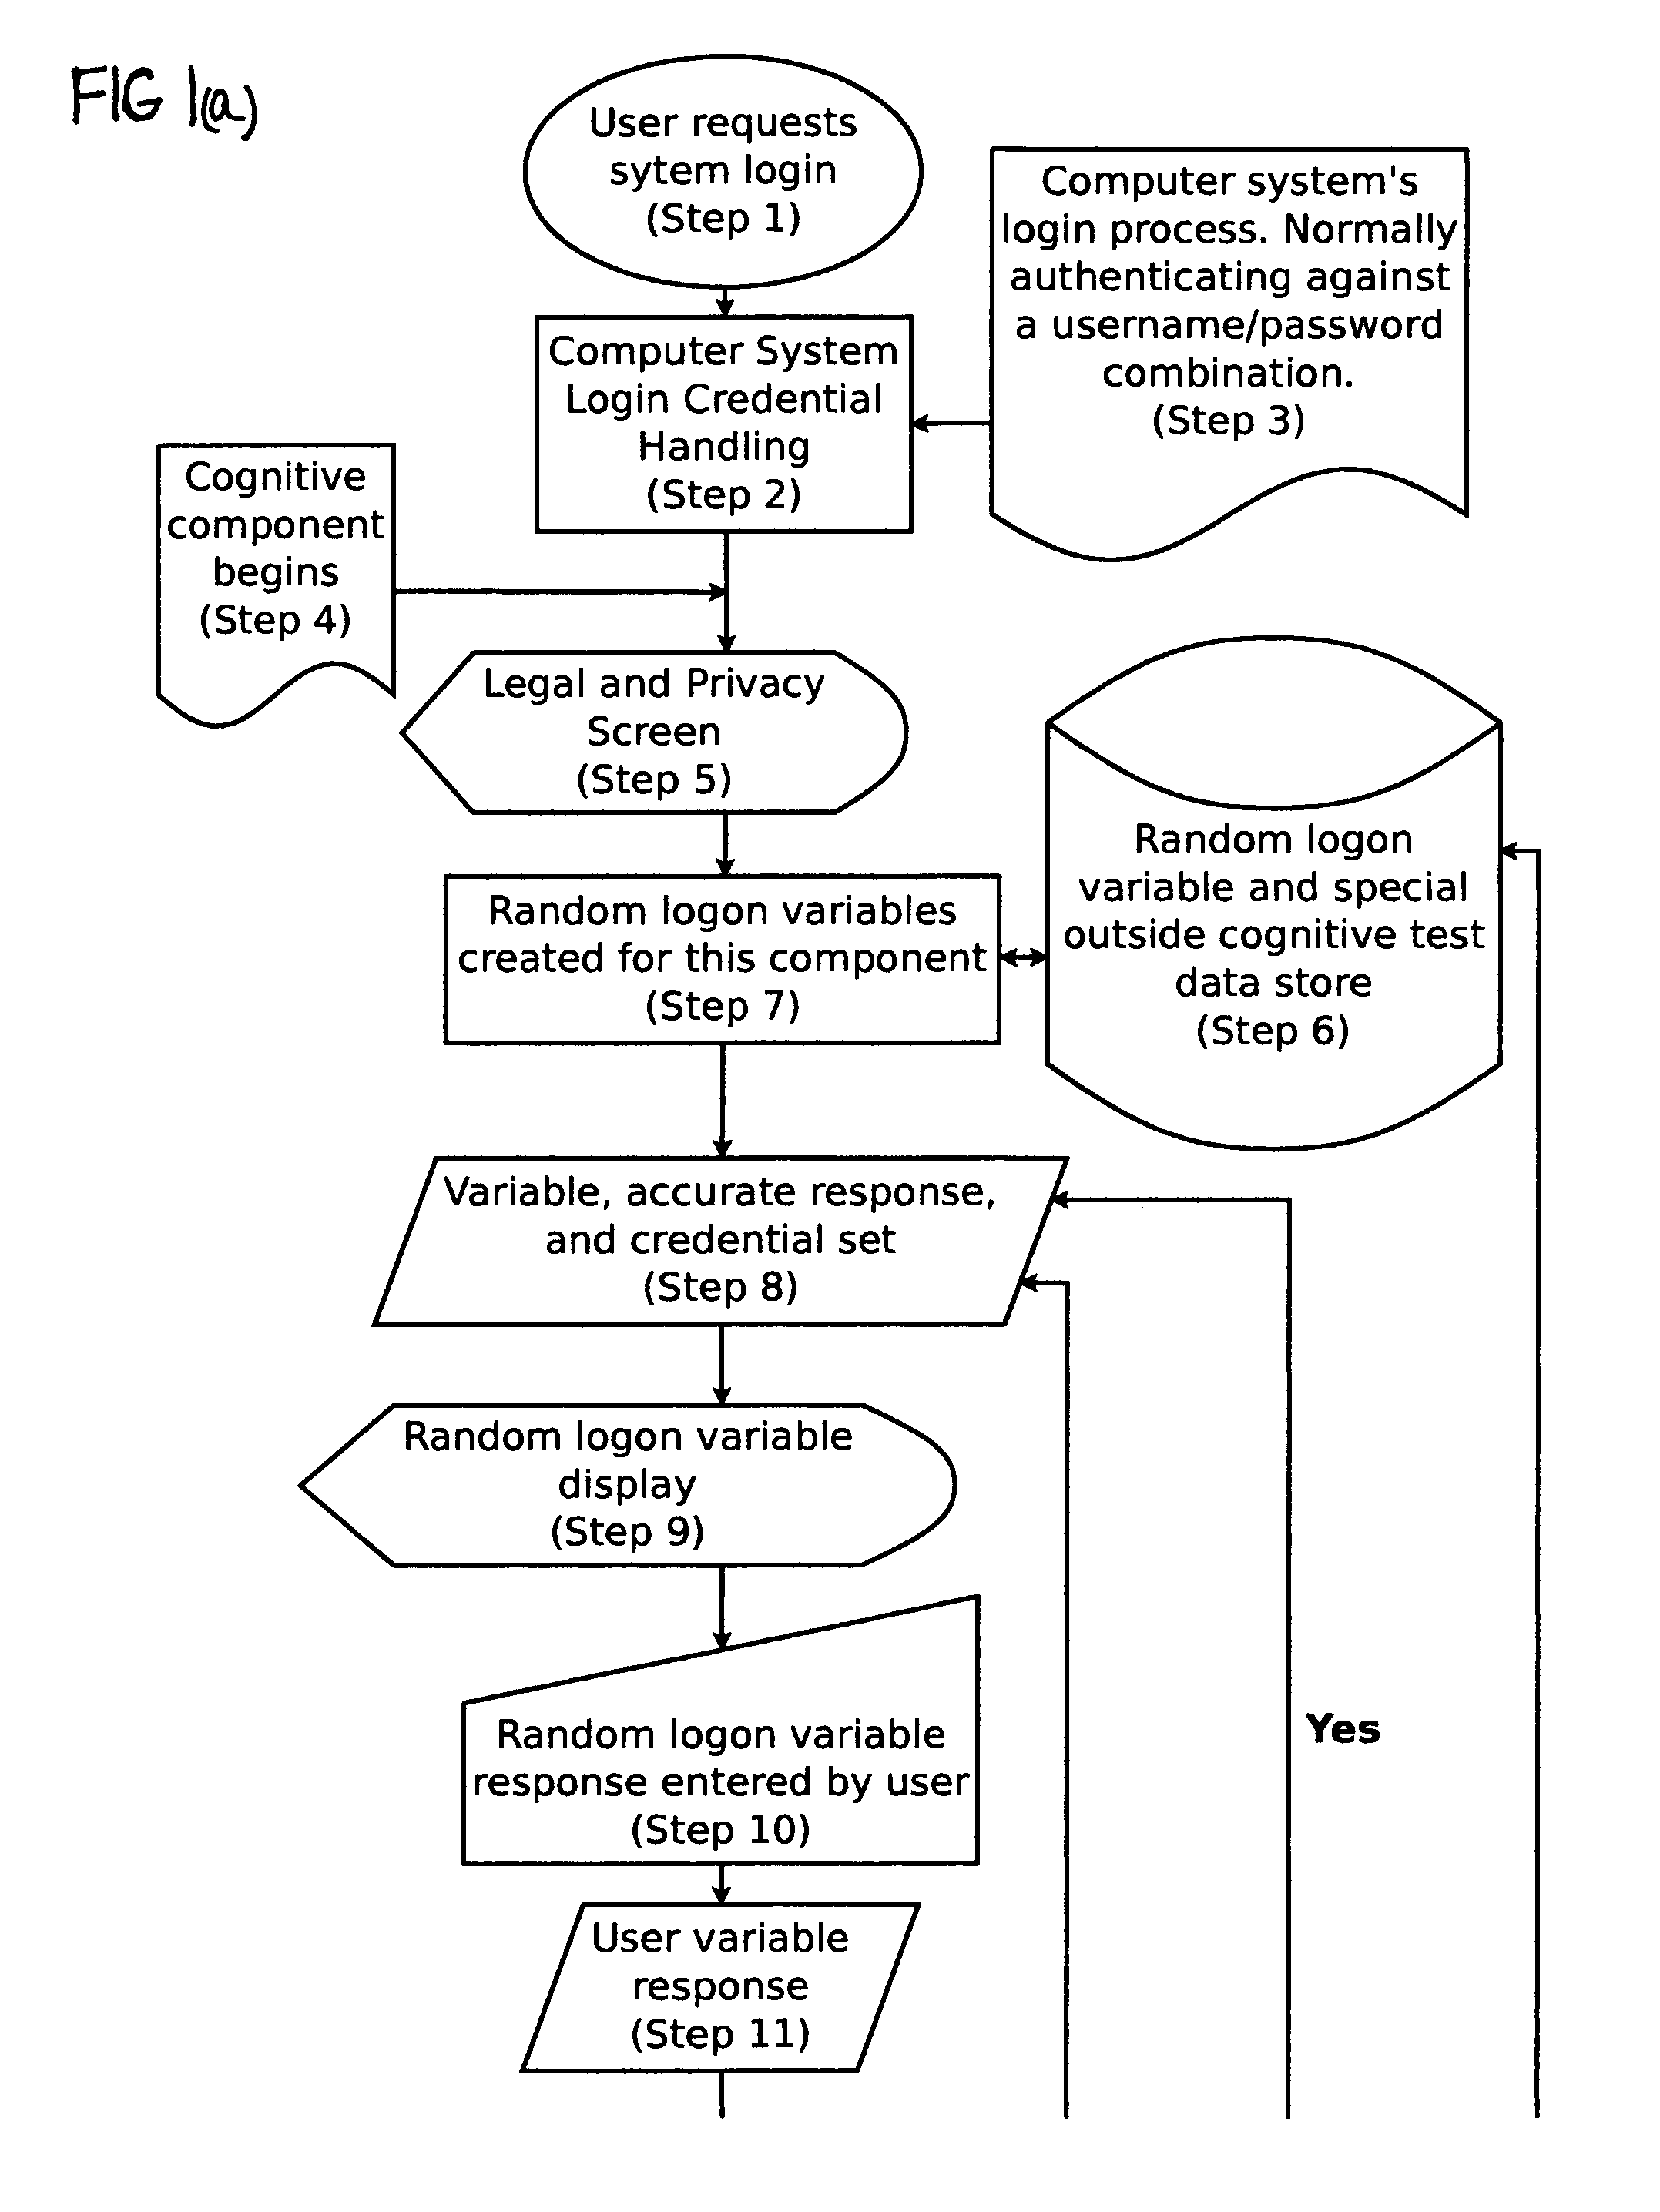 Cognitive-based loon process for computing device